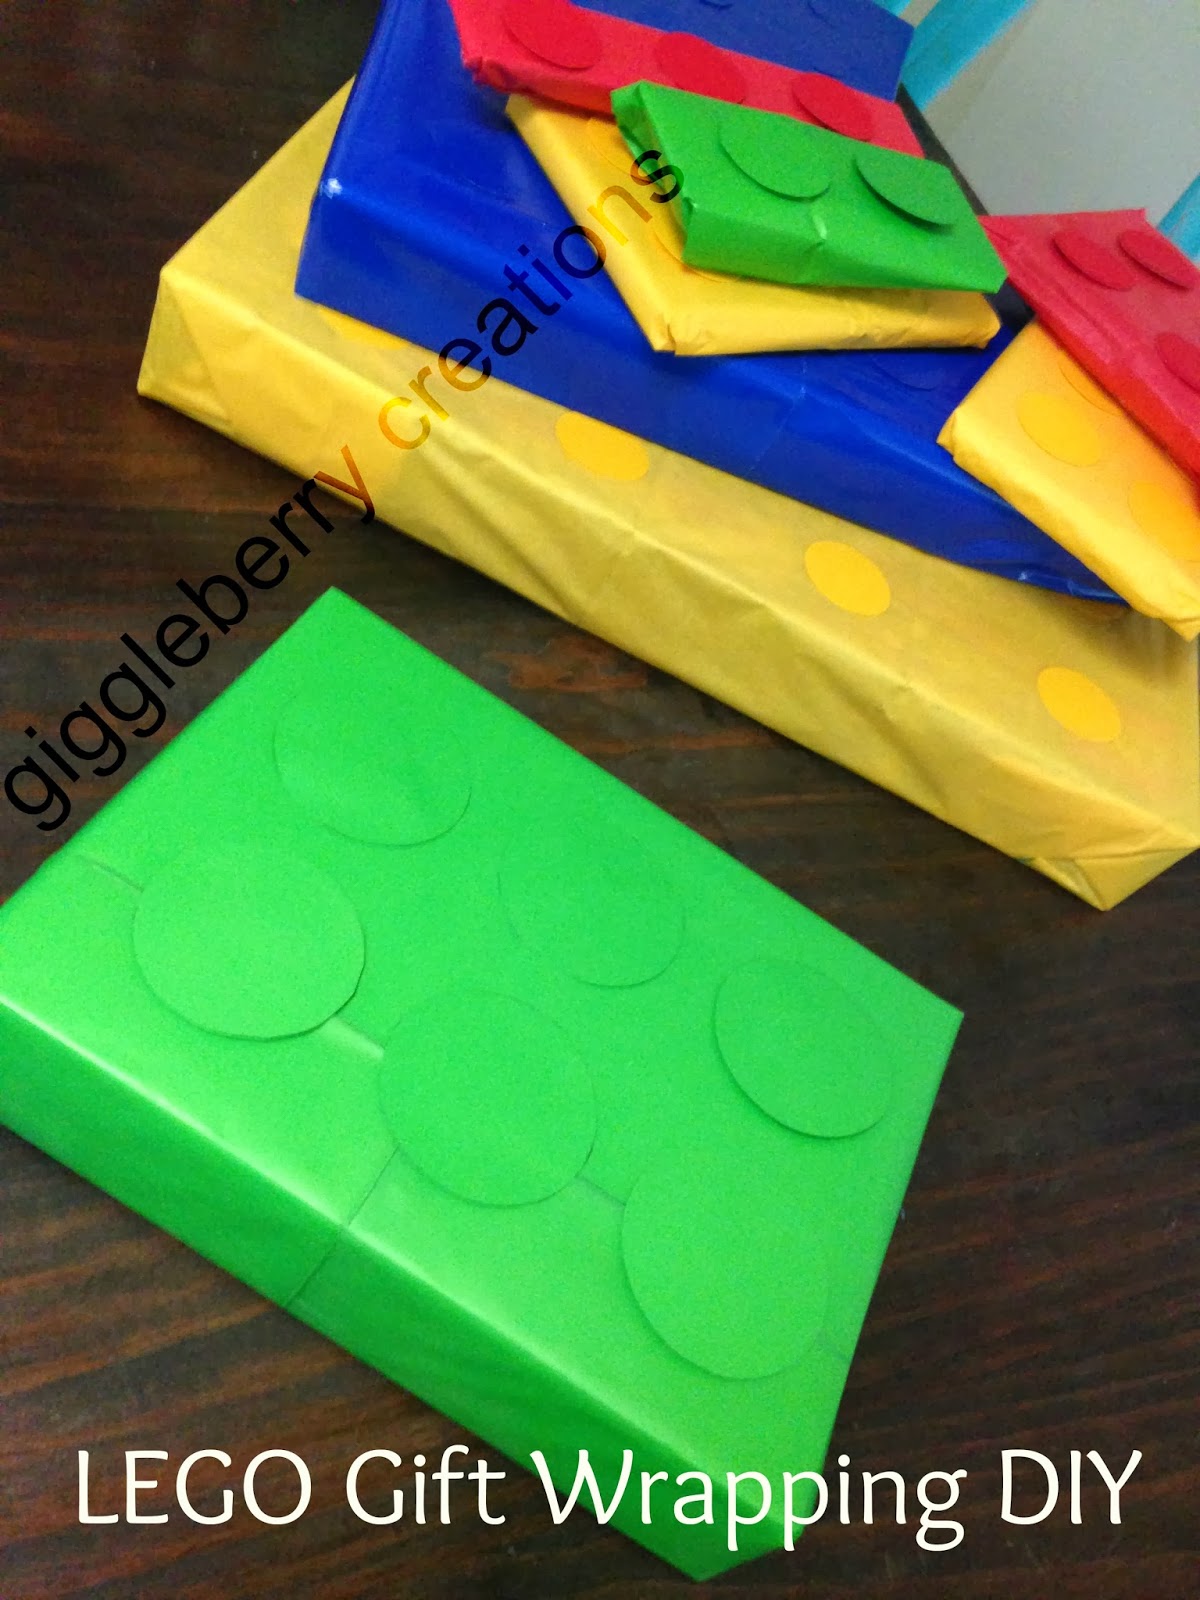 Giggleberry Creations!: LEGO Gift Wrapping DIY!